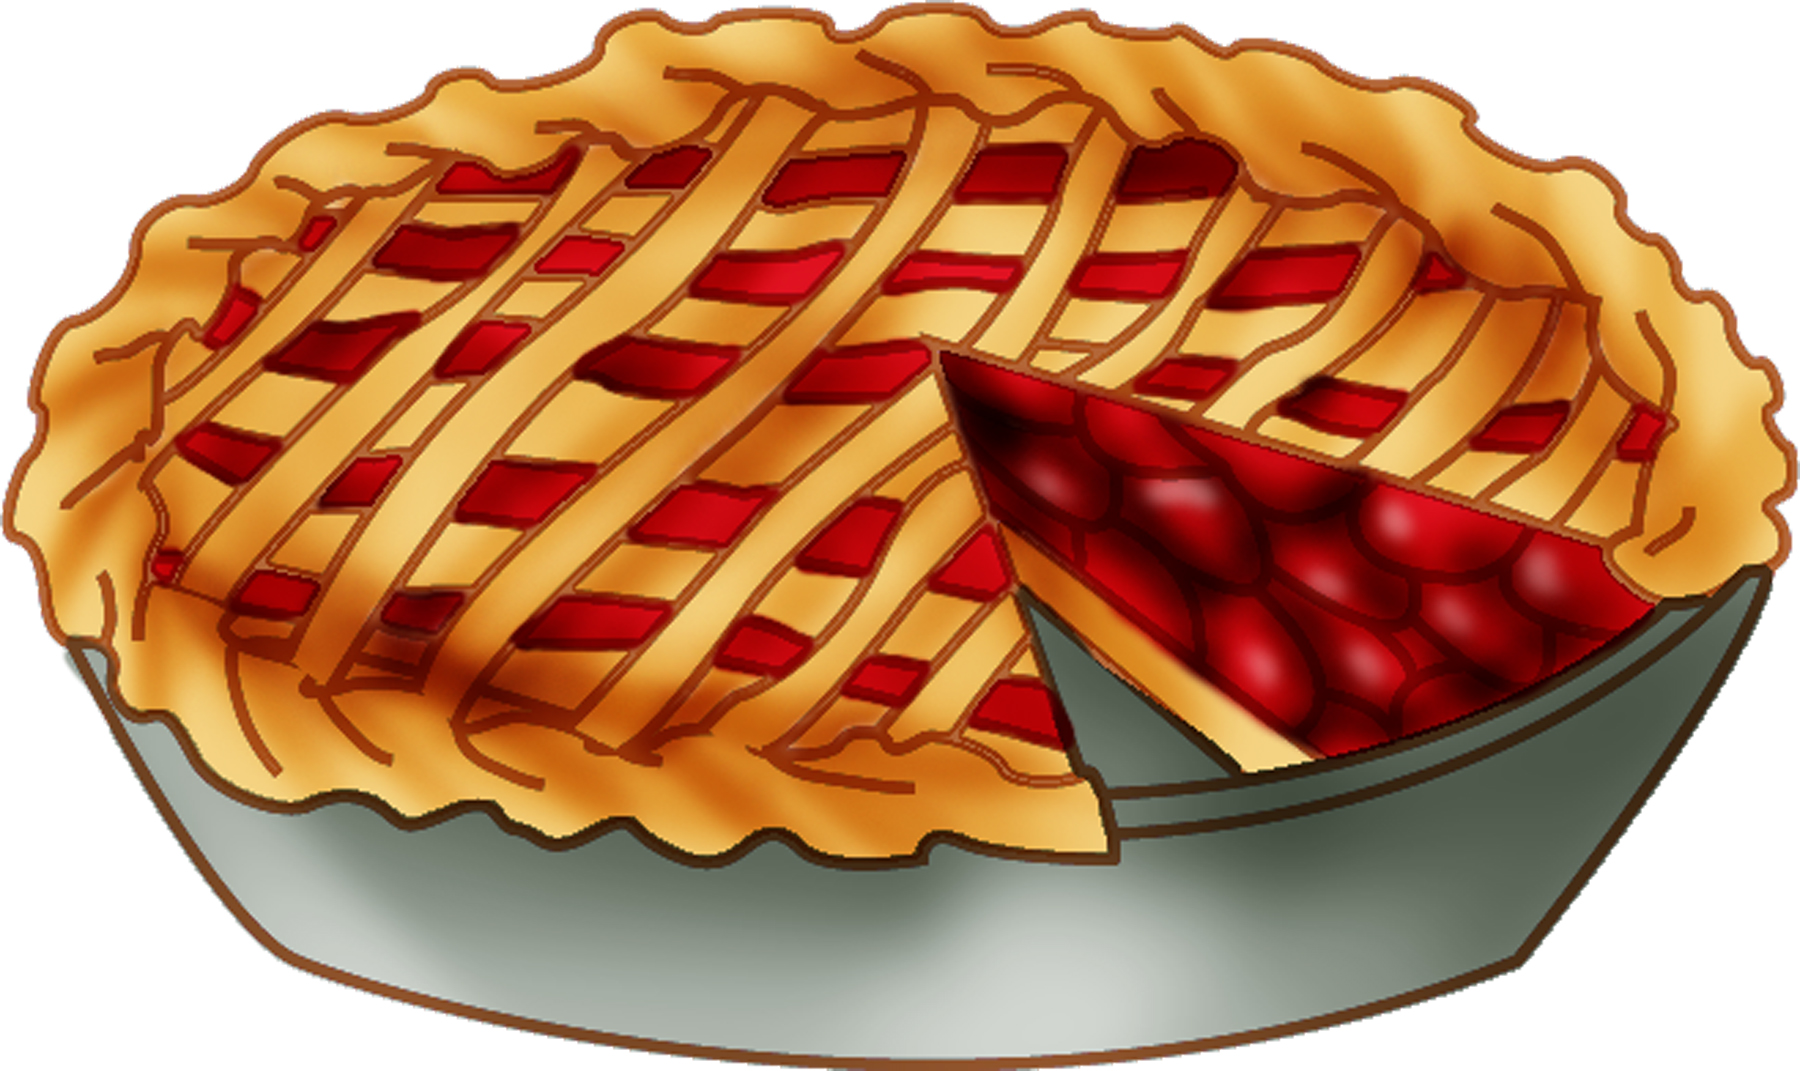 Clip Arts Related To : slice of pie vector. view all Pumpkin Pie Cliparts)....